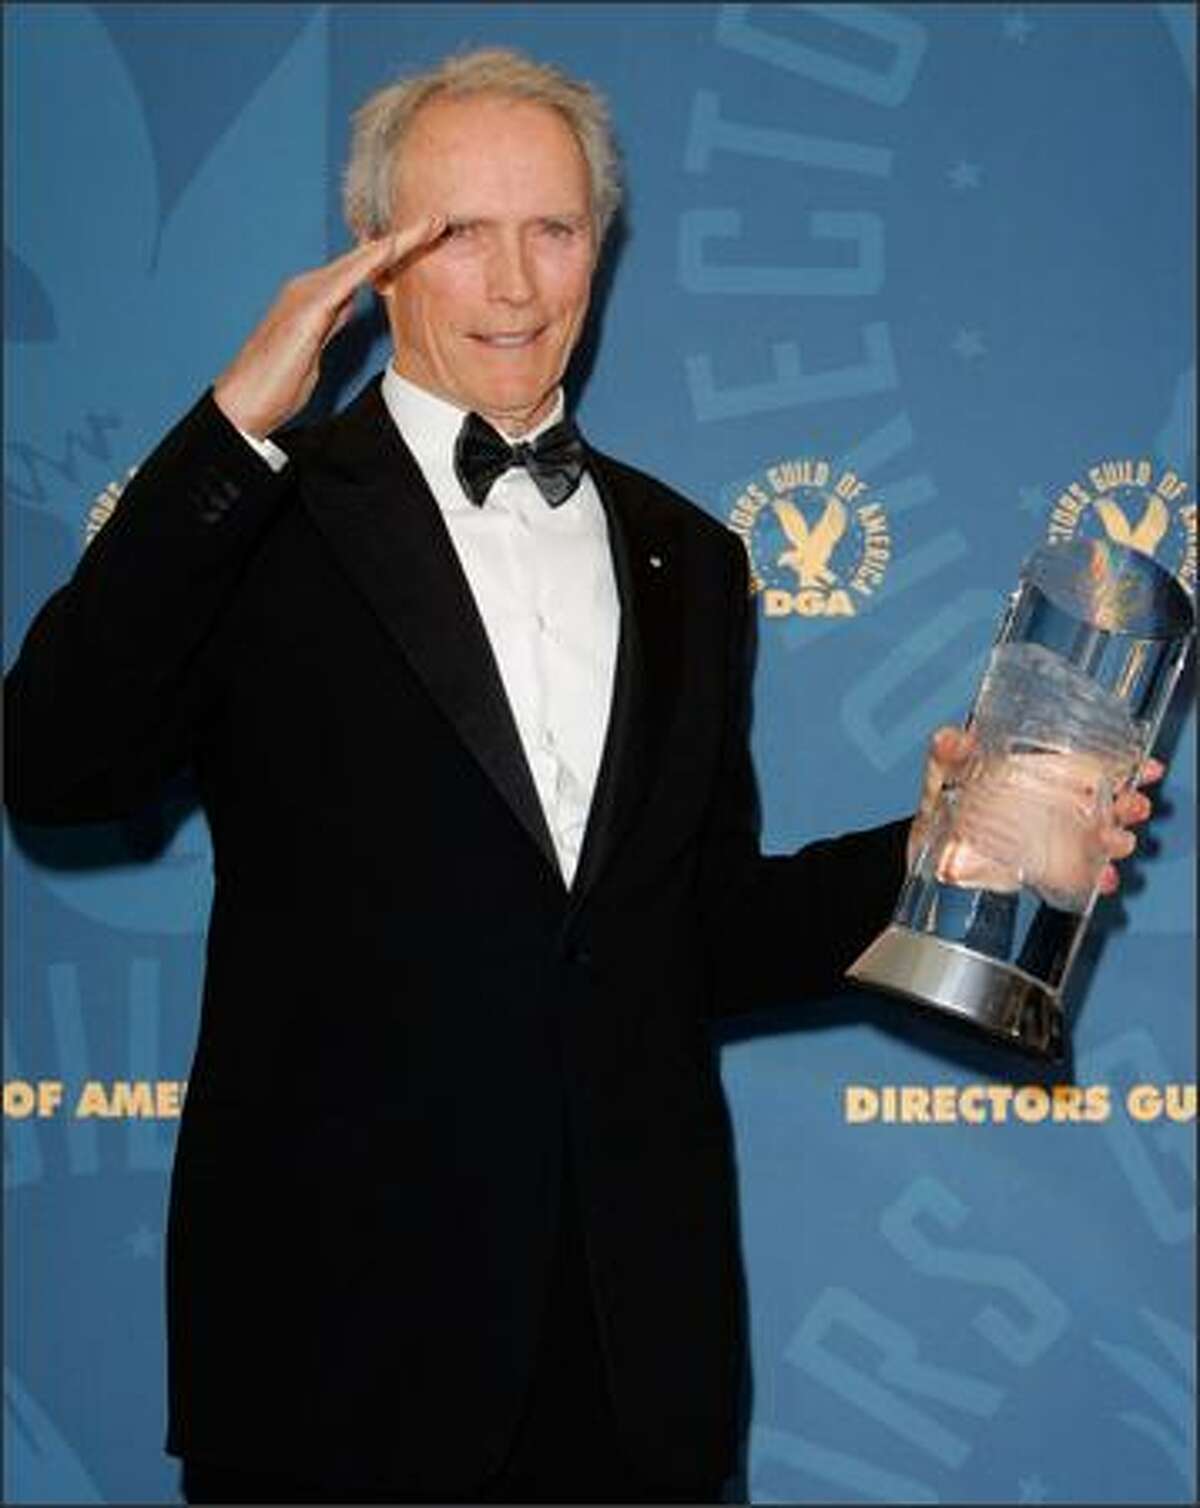 Clint Eastwood salutes backstage as he poses with the Directors Guild of America lifetime achievement award at the 58th Annual Directors Guild Awards in Los Angeles, on Saturday, Jan. 28, 2006. (AP Photo/Mark J. Terrill)